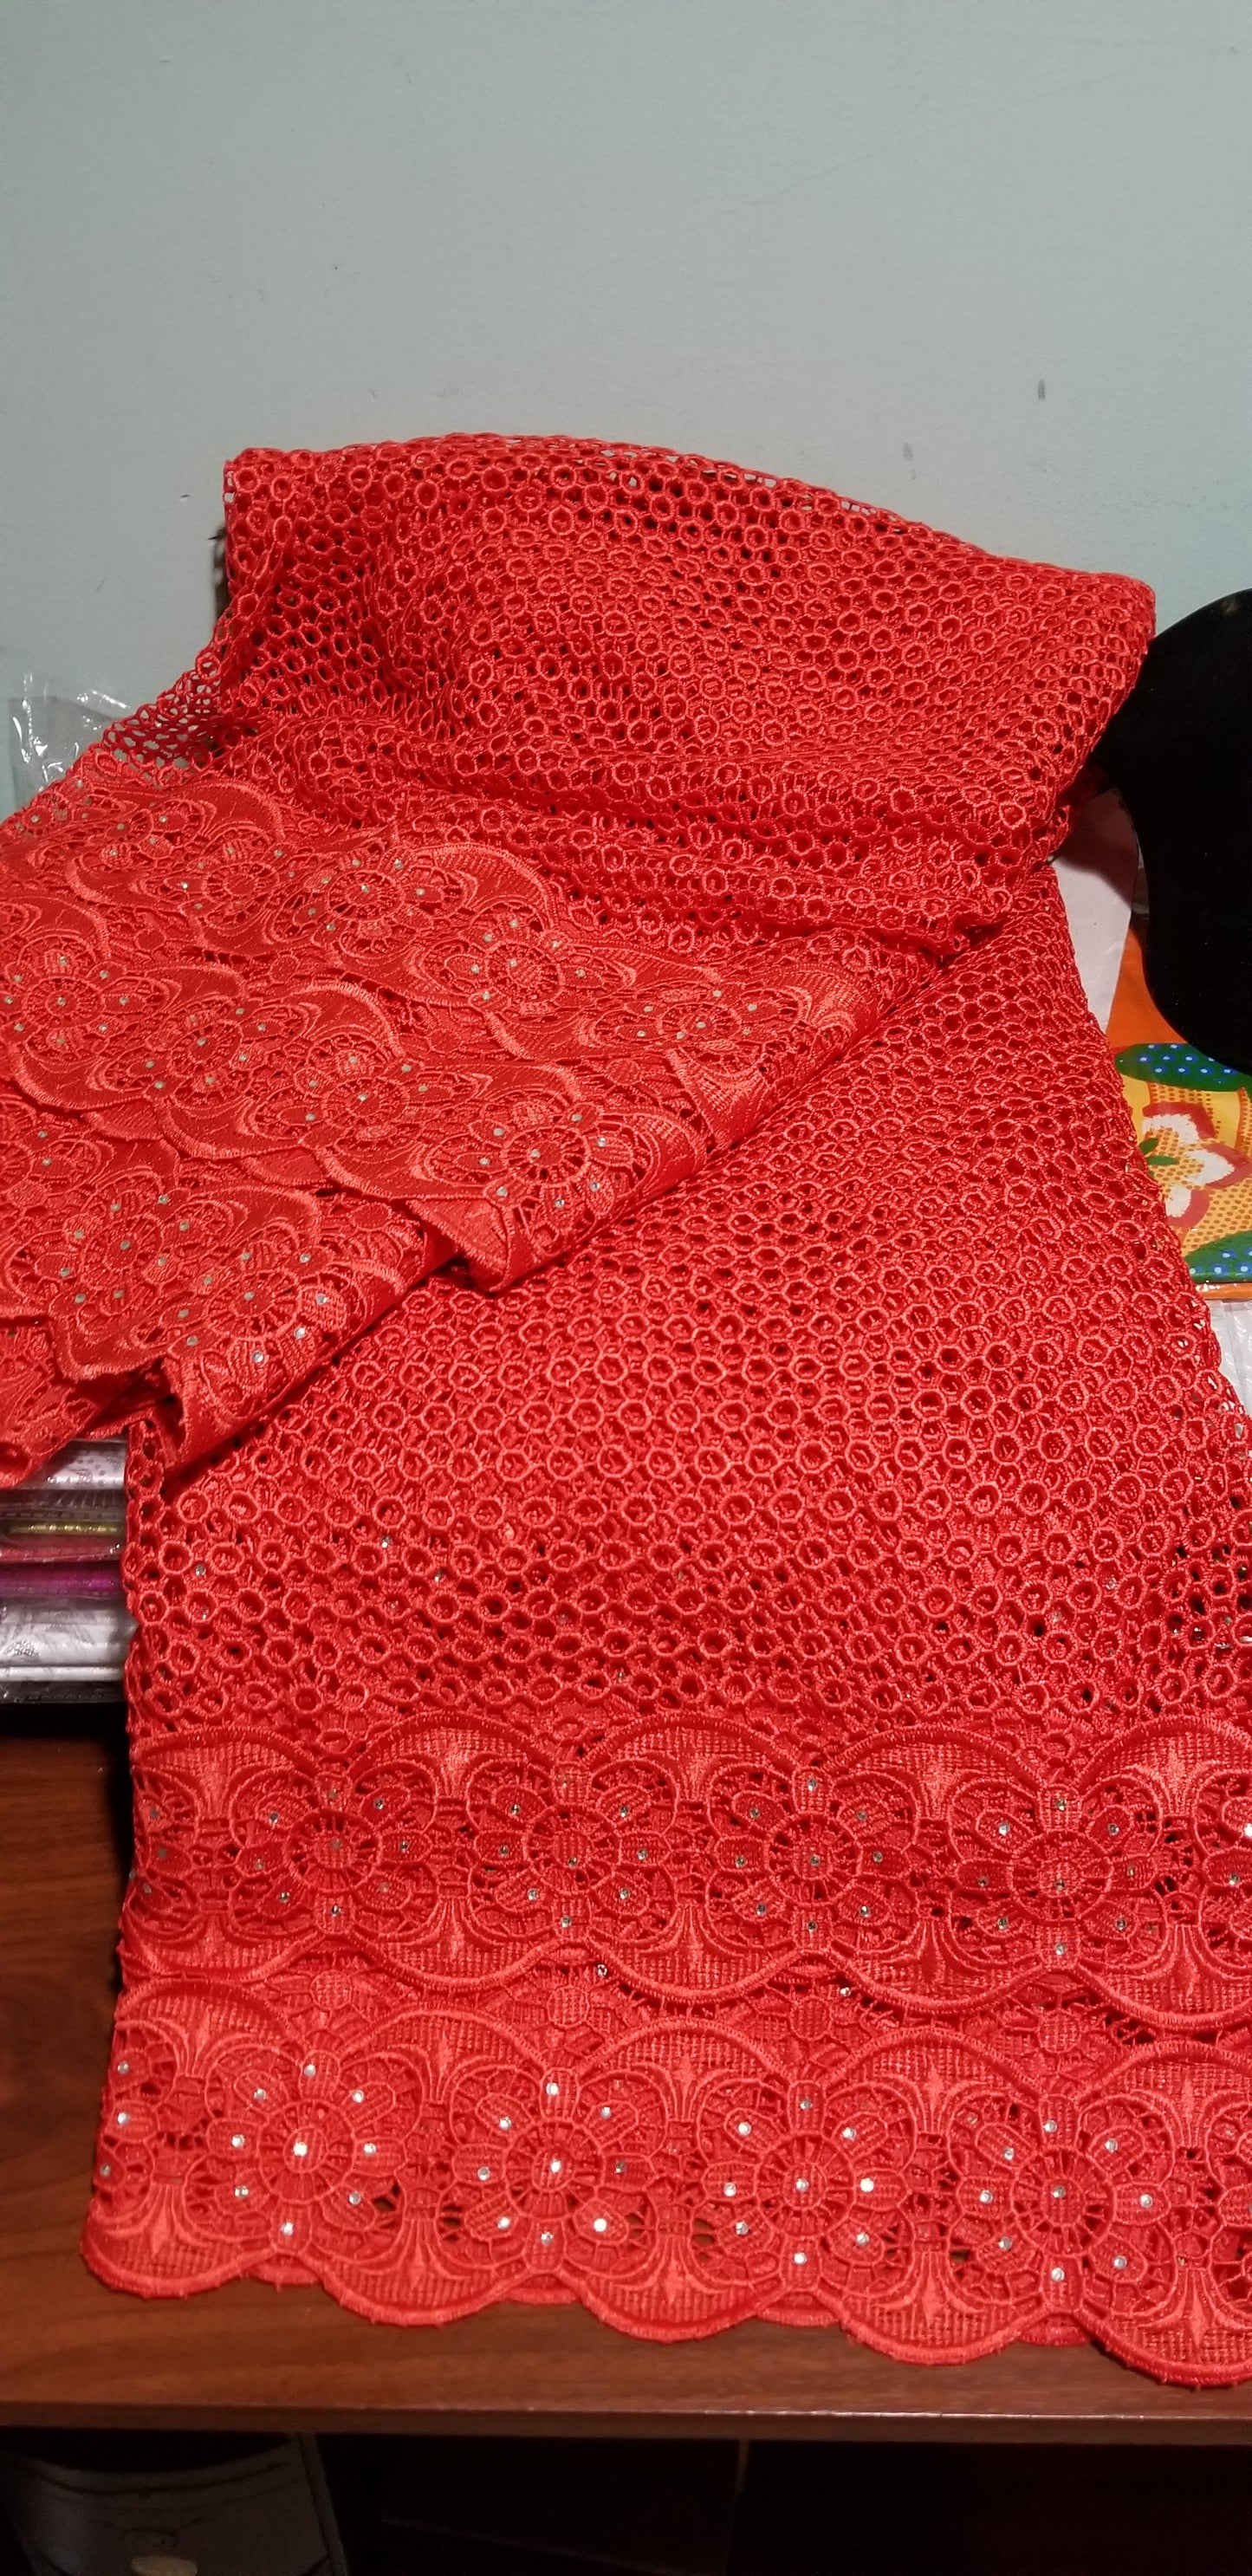 Clearance Item! Red cord-Lace. Super quality embellish with crystal stones. Nigerian Nigerian Guipure/cord lace fabric for making party outfit sold per 5yds. Price is for 5yds